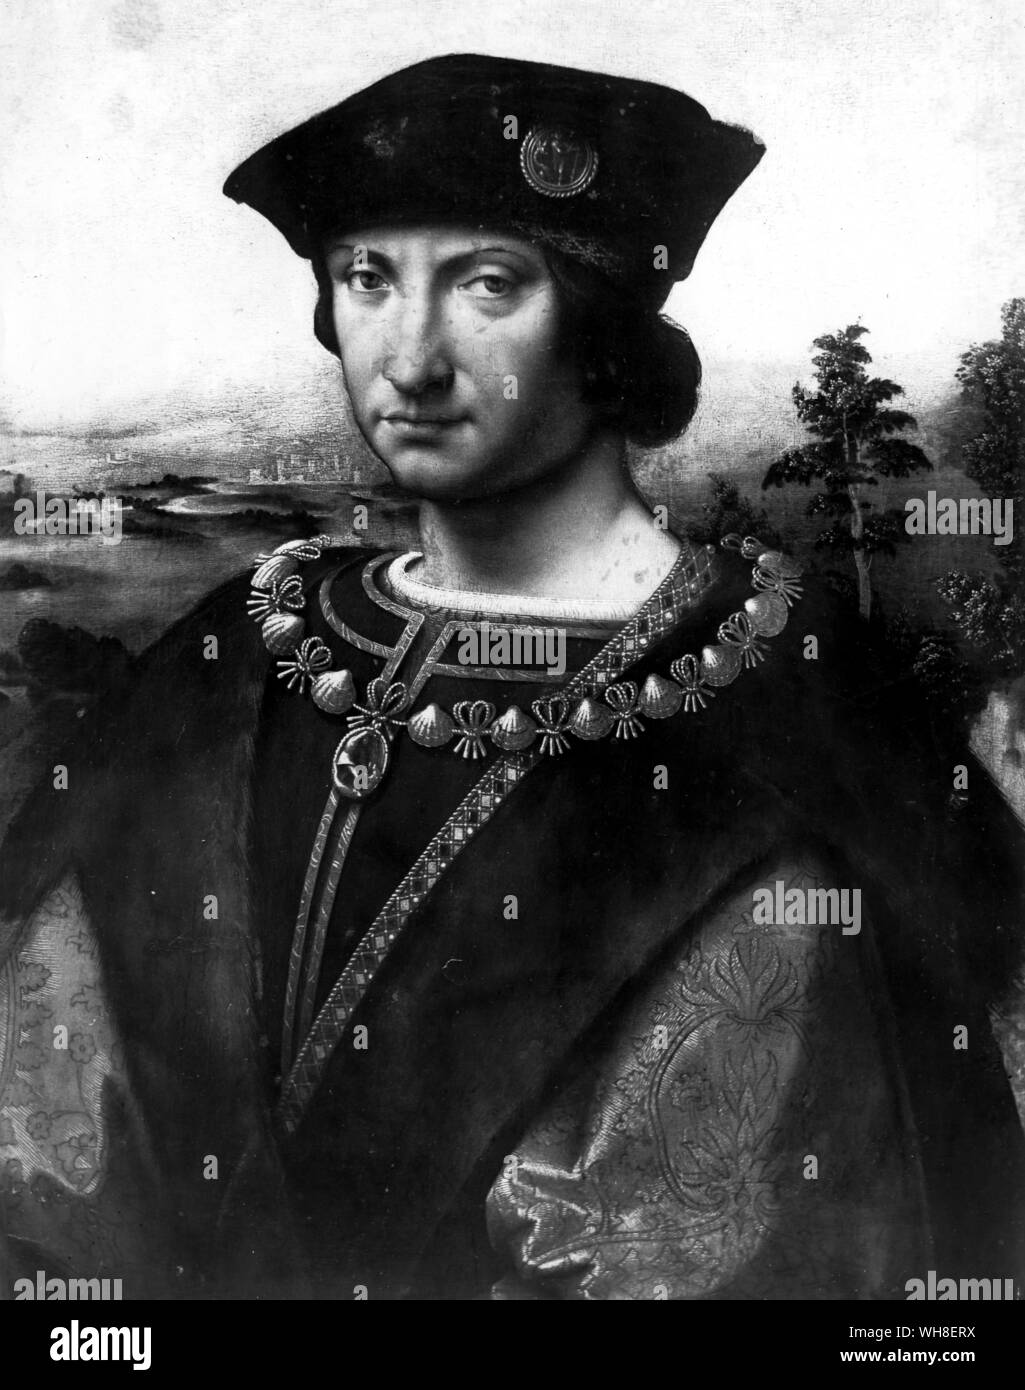 Charles d' Amboise, 1507, portrait by Andrea Solario (1460-1522), an Italian Renaissance painter. Charles d'Amboise, (d. 1511) was the French governor of Milan during the reign of Louis XII, and a French commander during the War of the League of Cambrai. He was a great friend of Leonardo da Vinci during his stay in Milan. At the battle of Agnadello, he commanded the French vanguard. In 1510, he took command of the French forces fighting against Pope Julius II in the Romagna, for which he was excommunicated.. Leonardo and the Age of the Eye, by Eritchie Calder page 200.. . Stock Photo